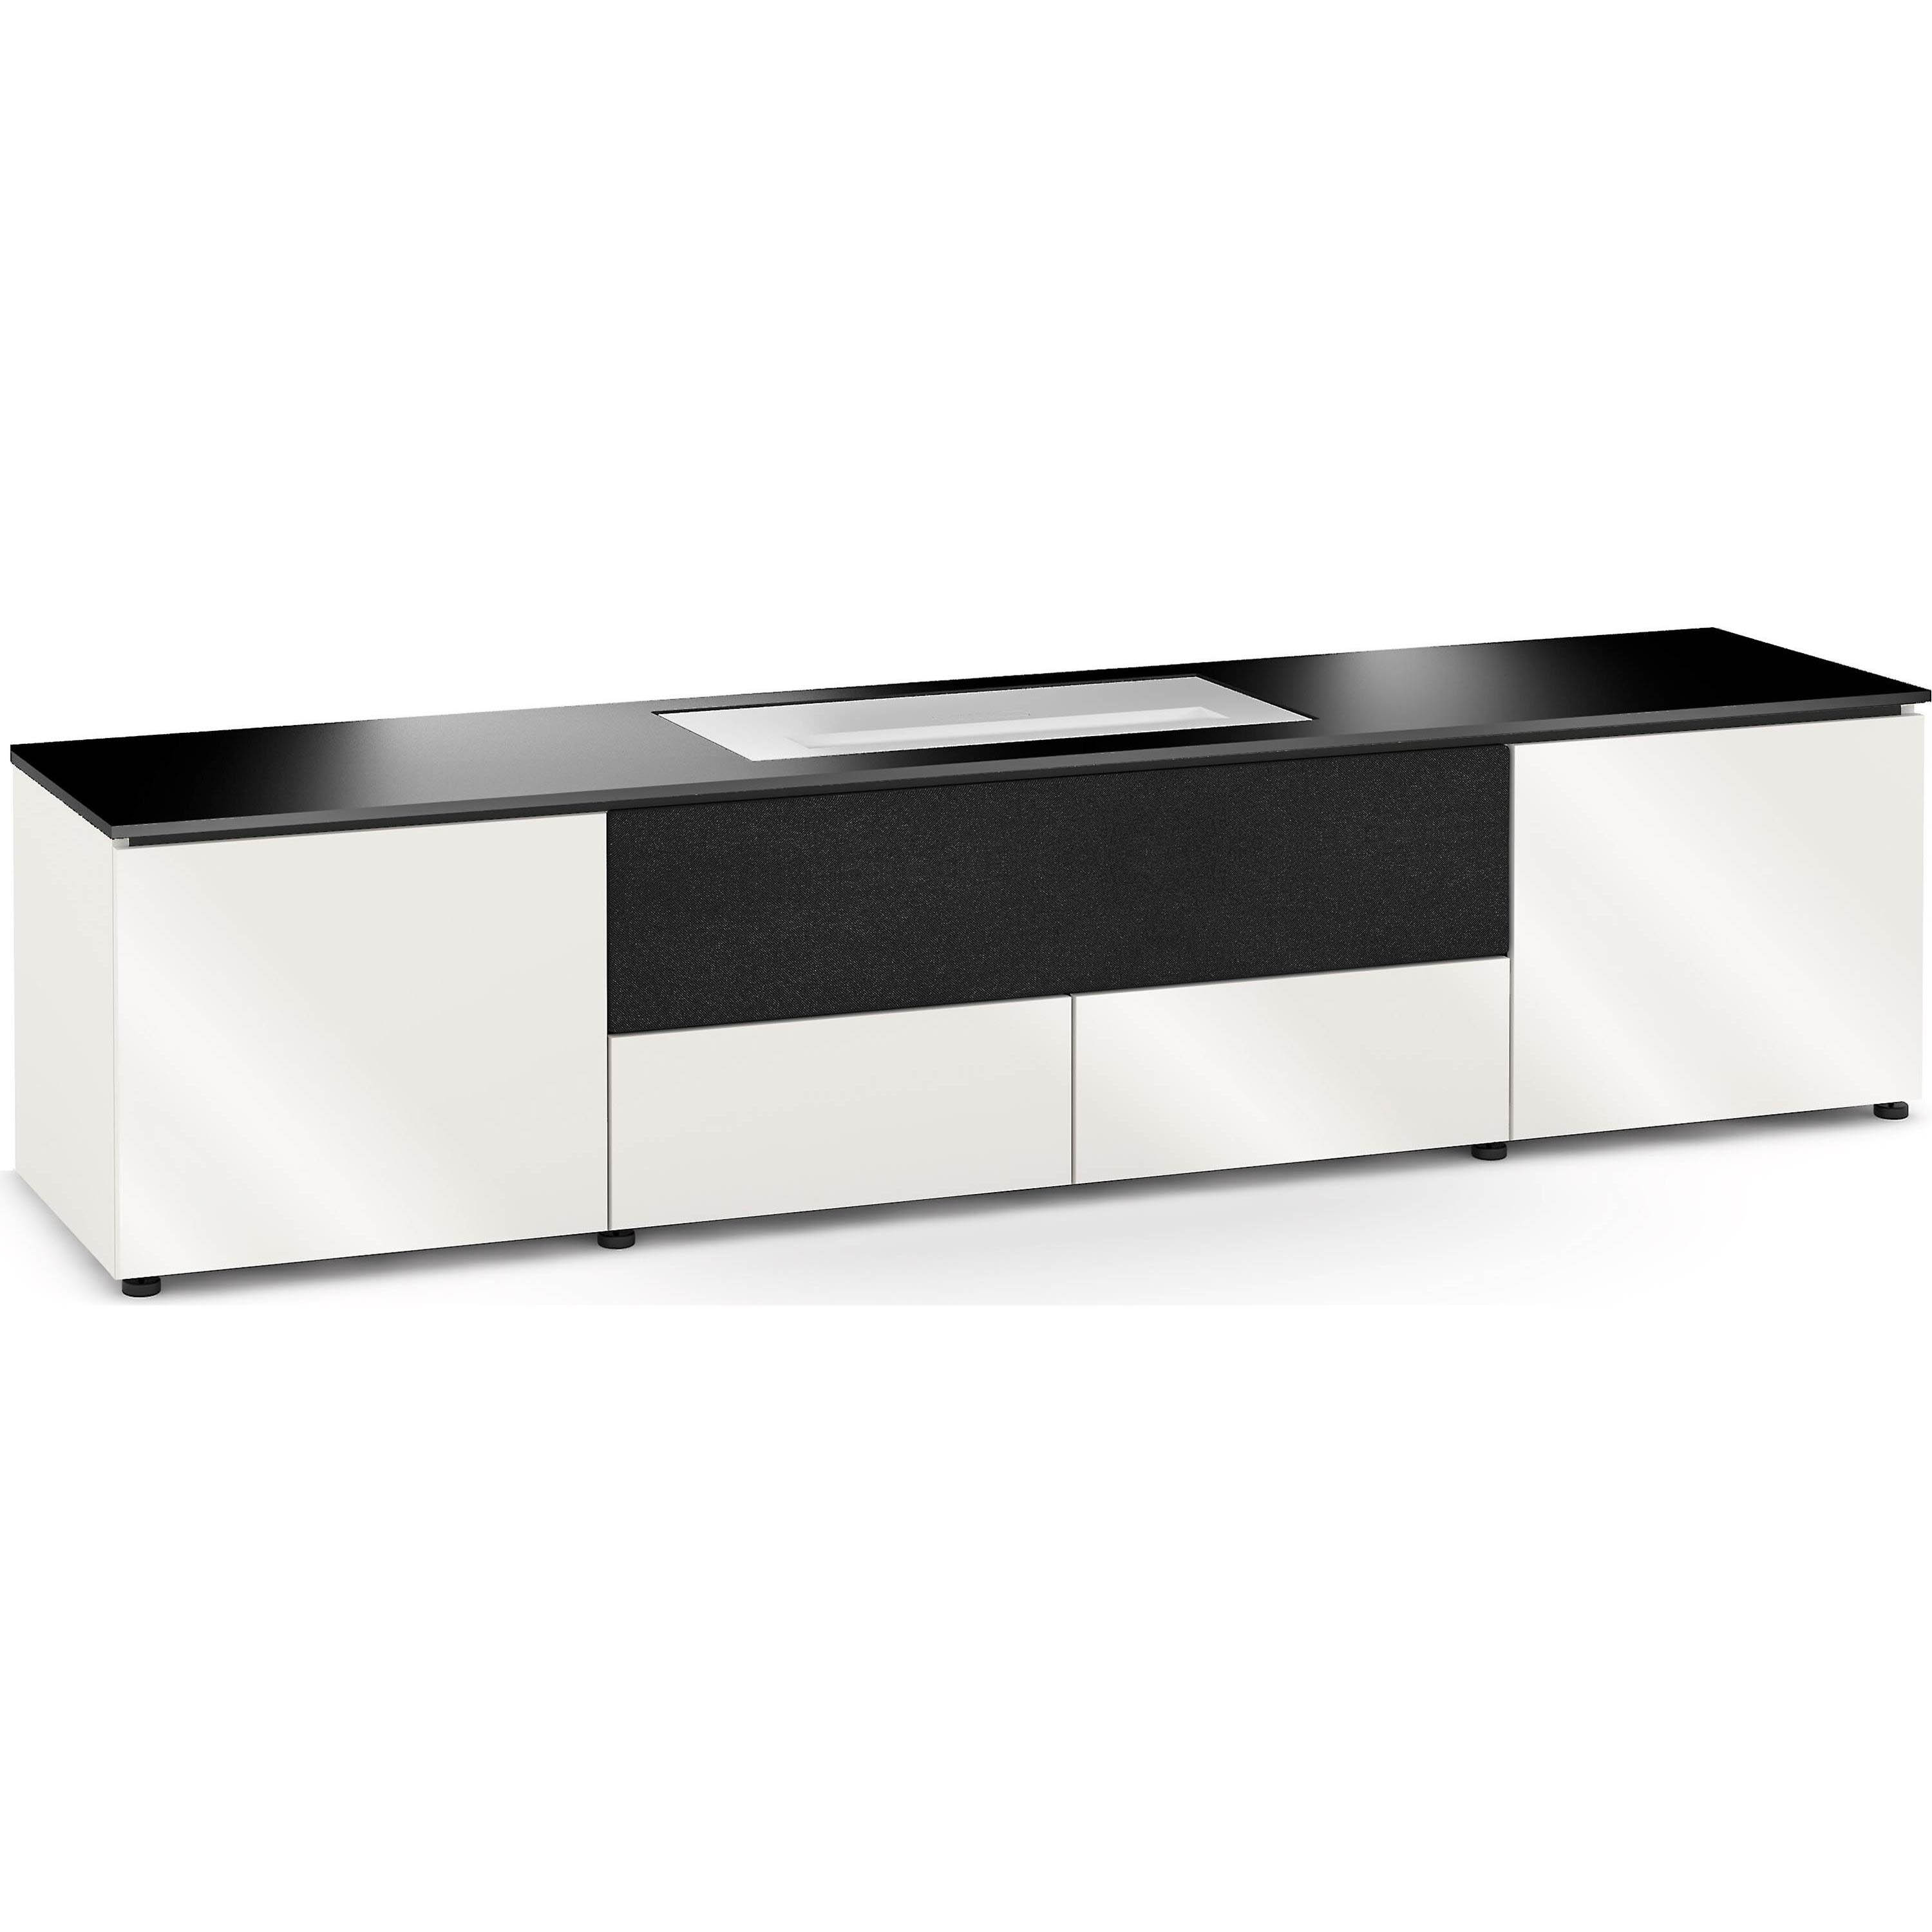 Salamander Designs Miami 245 Cabinet for integrated LG UST Projector - Gloss White, Black Top - X/LG1/245GW/BK